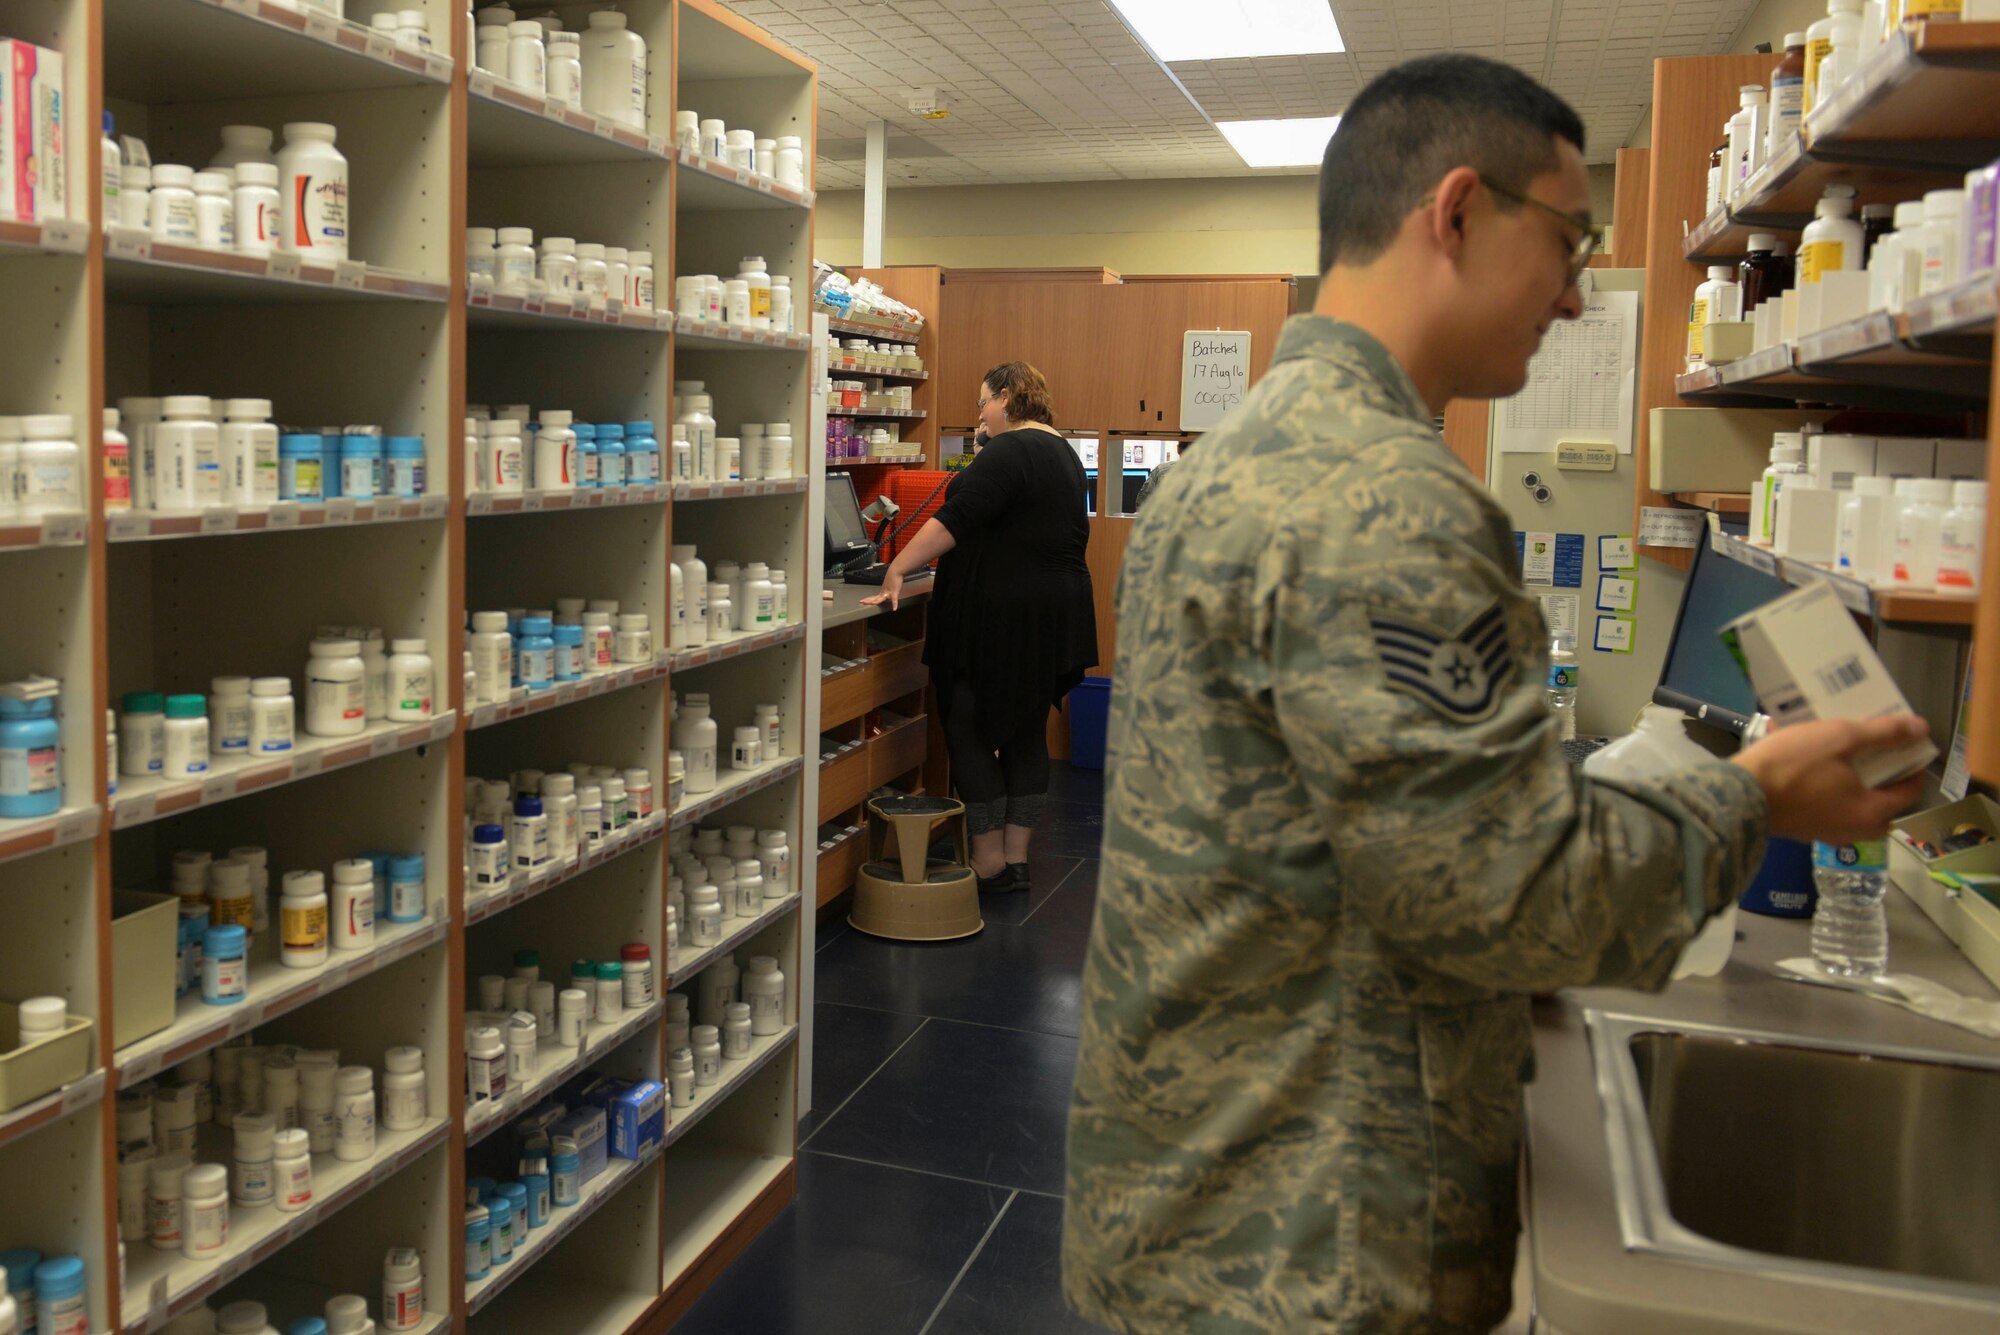 Pharmacists complete on-duty tasks at Minot Air Force Base, N.D., Aug. 17, 2016. Pharmacists provide prescriptions to all active duty military, to include personnel reliability program and arming and use-of-force Airmen. (U.S Air Force photo/Airman 1st Class Jessica Weissman)